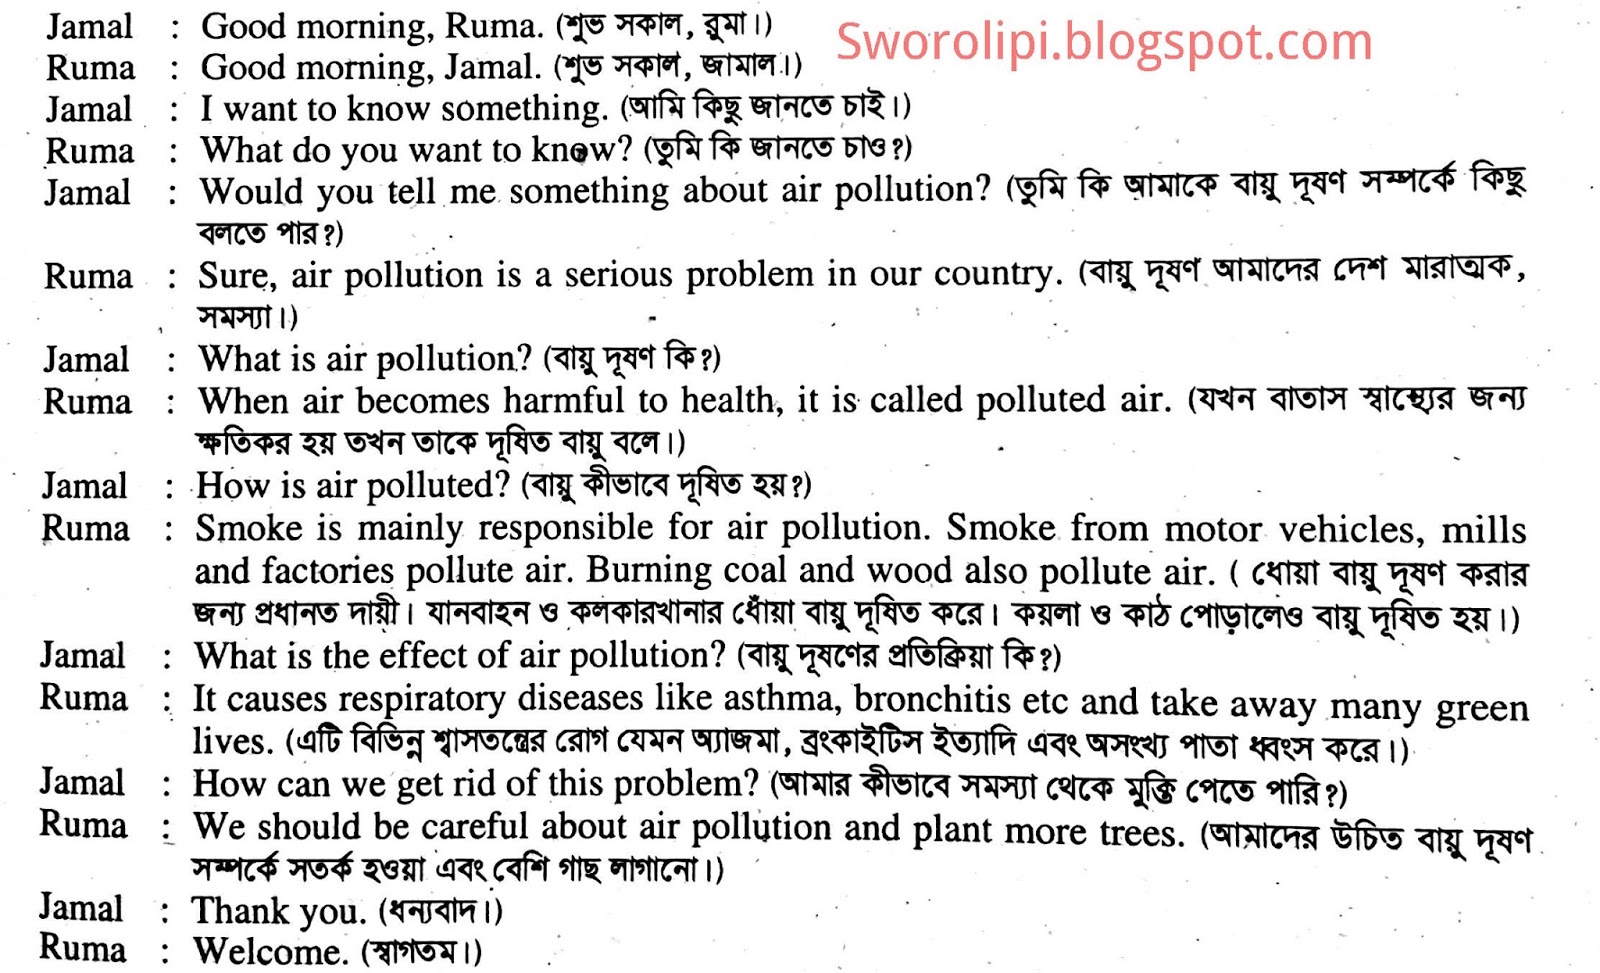 dialogue between three friends about pollution